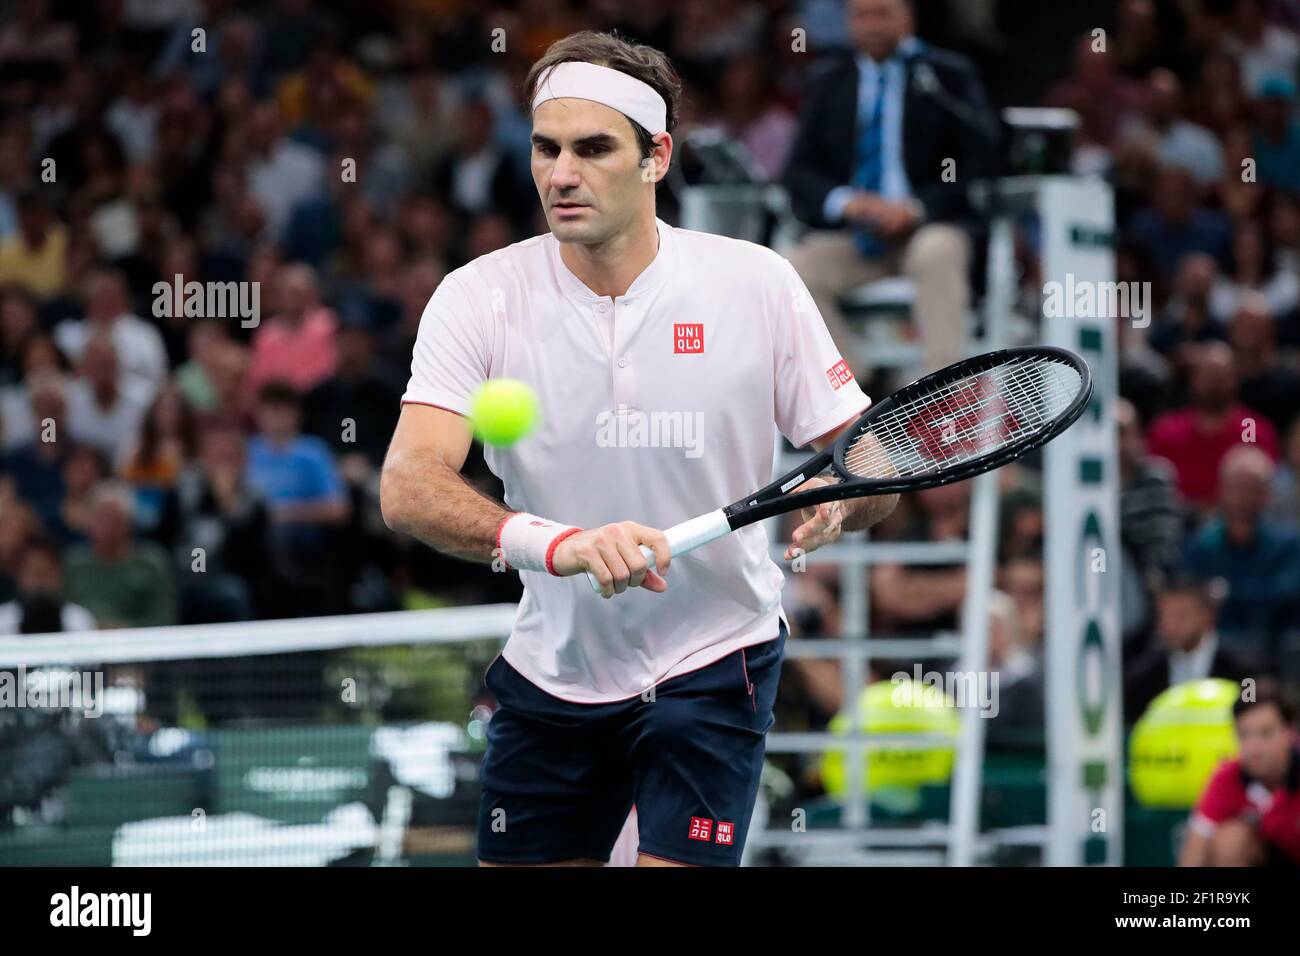 Roger FEDERER (SUI) during the Rolex Paris Masters Paris 2018 Tennis match  on November 3rd, 2018 at AccorHotels Arena (Bercy) in Paris, France - Photo  Stephane Allaman / DPPI Stock Photo - Alamy